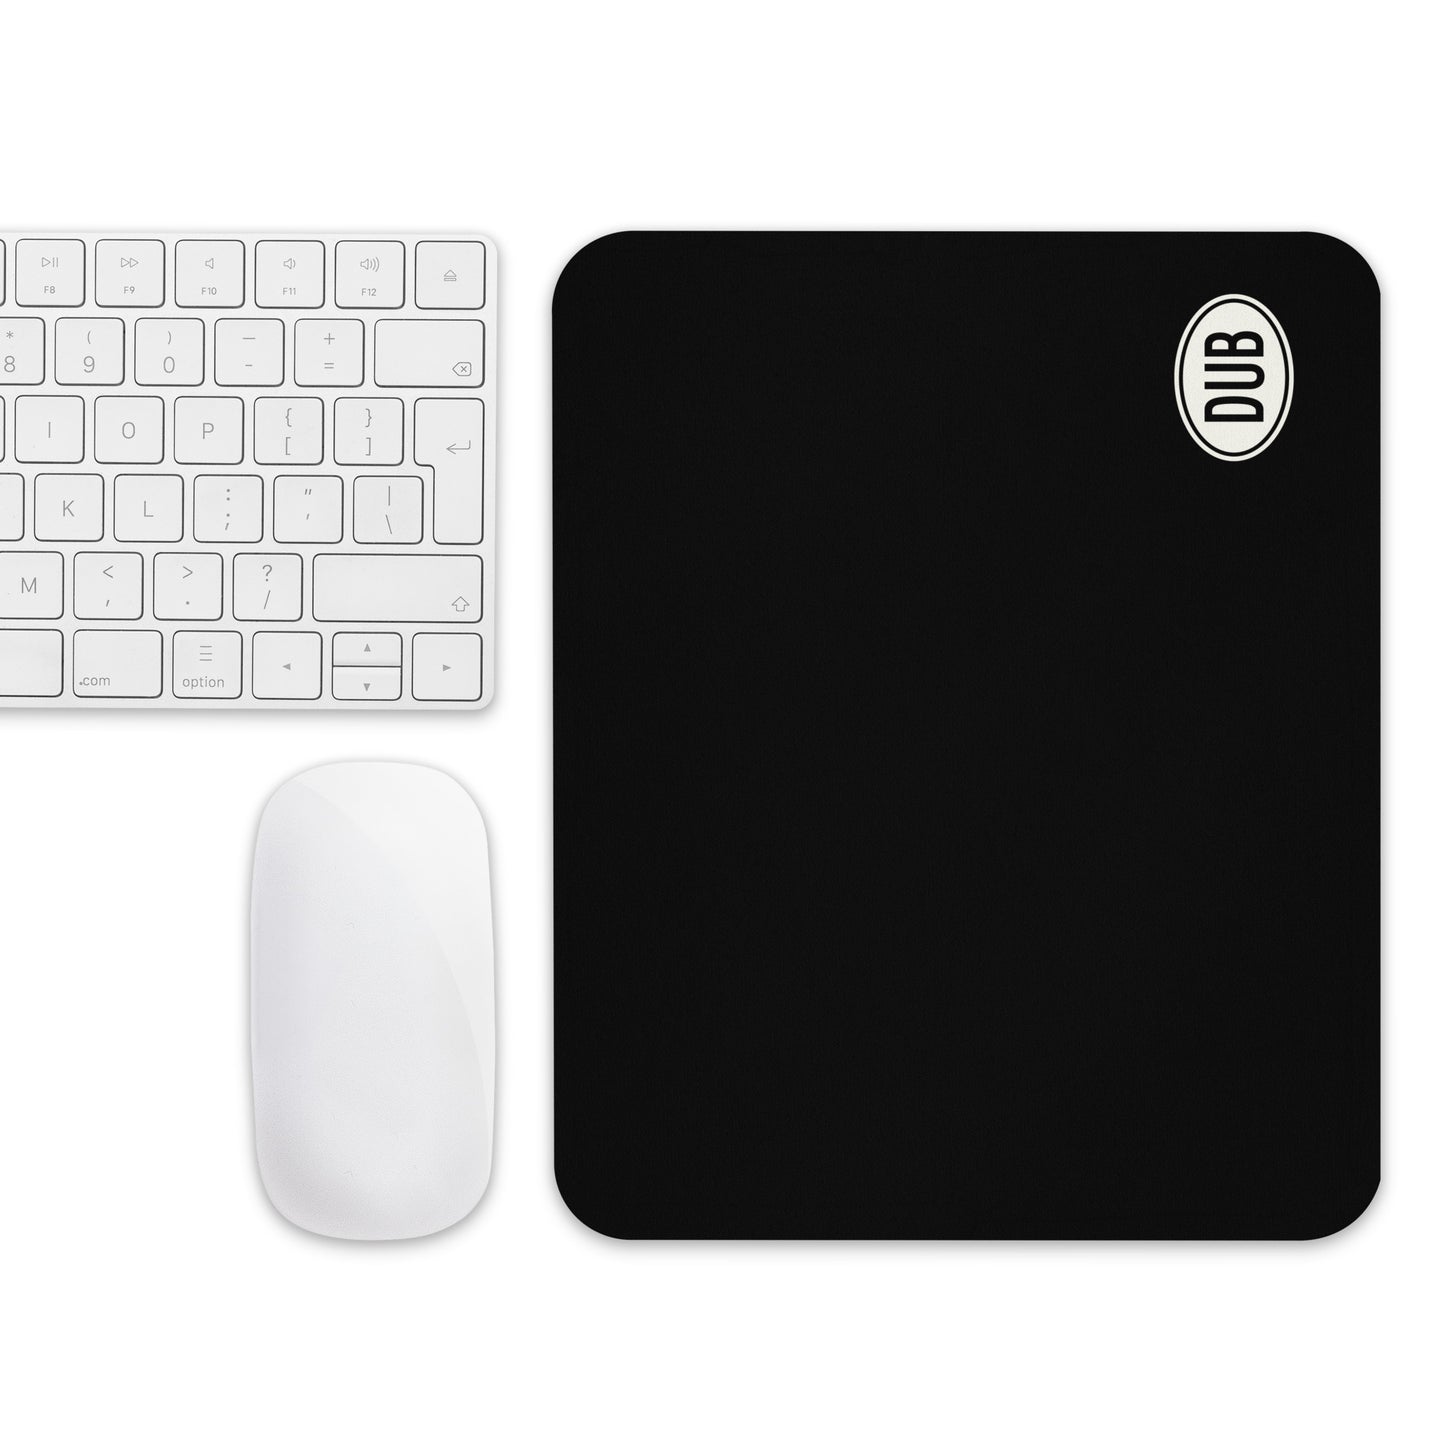 Unique Travel Gift Mouse Pad - White Oval • DUB Dublin • YHM Designs - Image 04